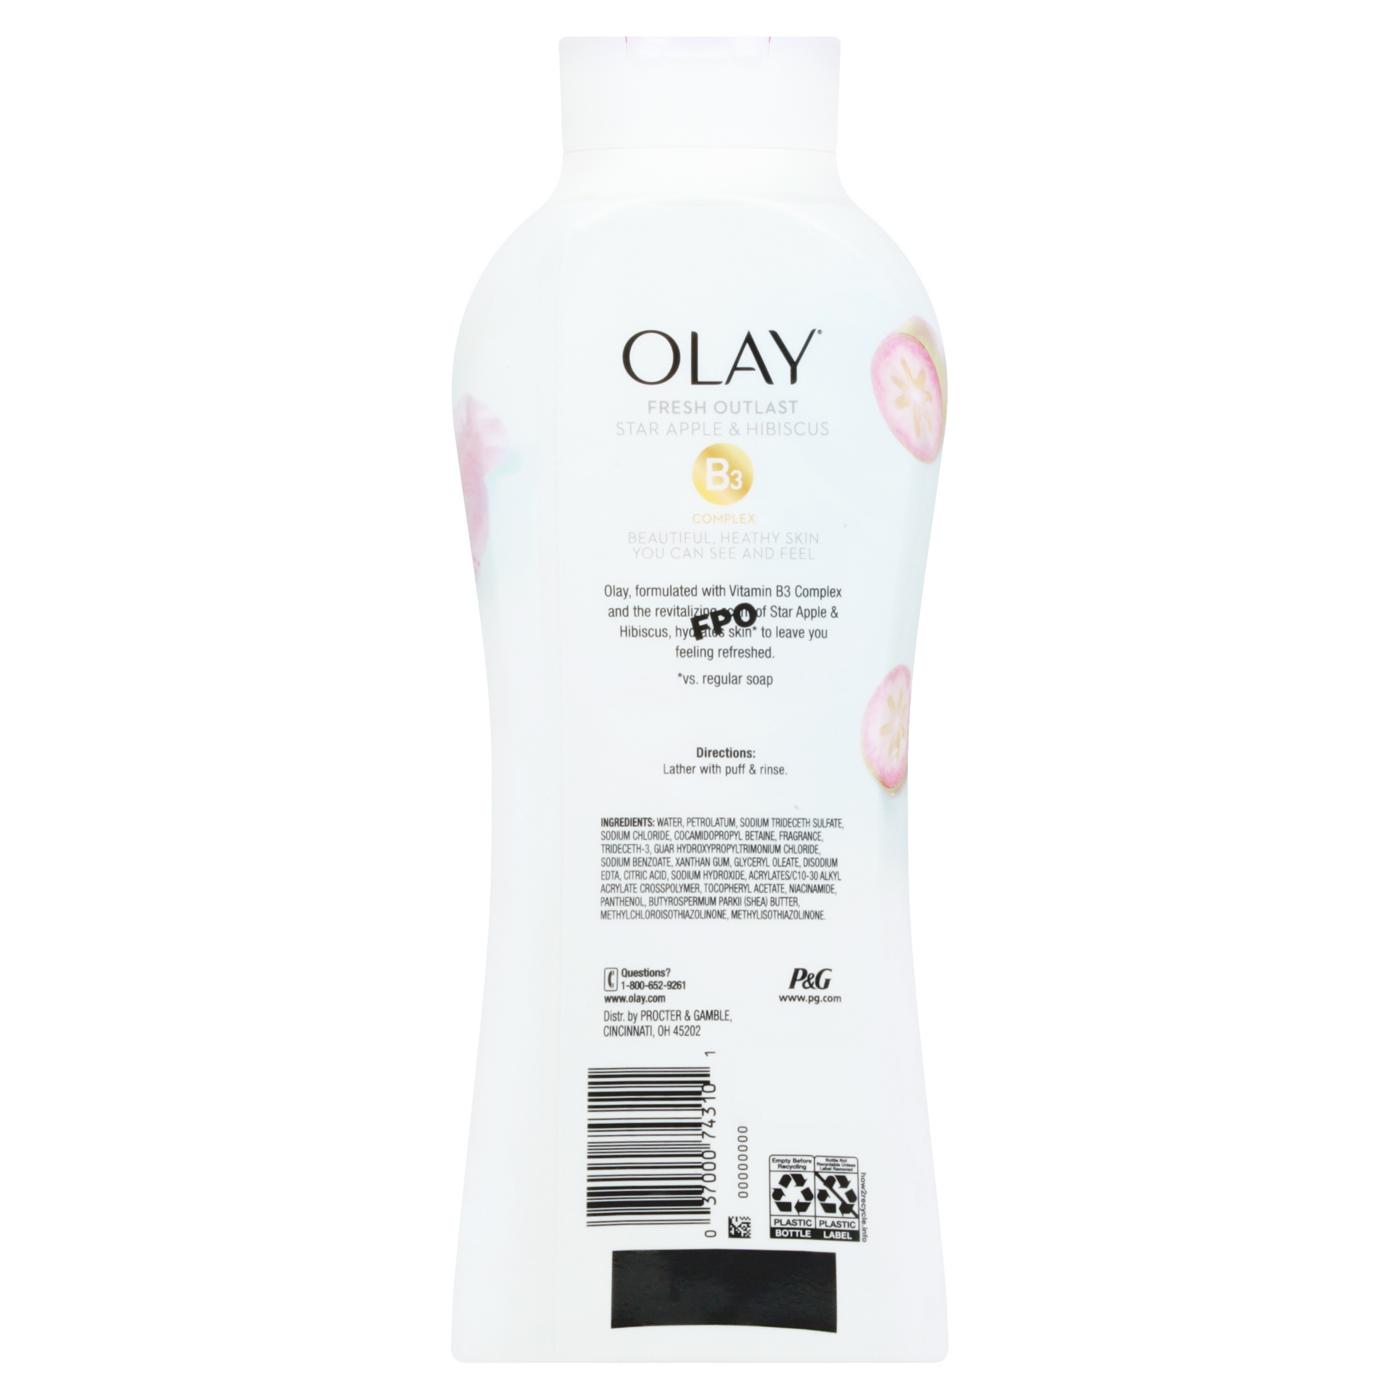 Olay Fresh Outlast Star Apple & Hibiscus Body Wash; image 2 of 2